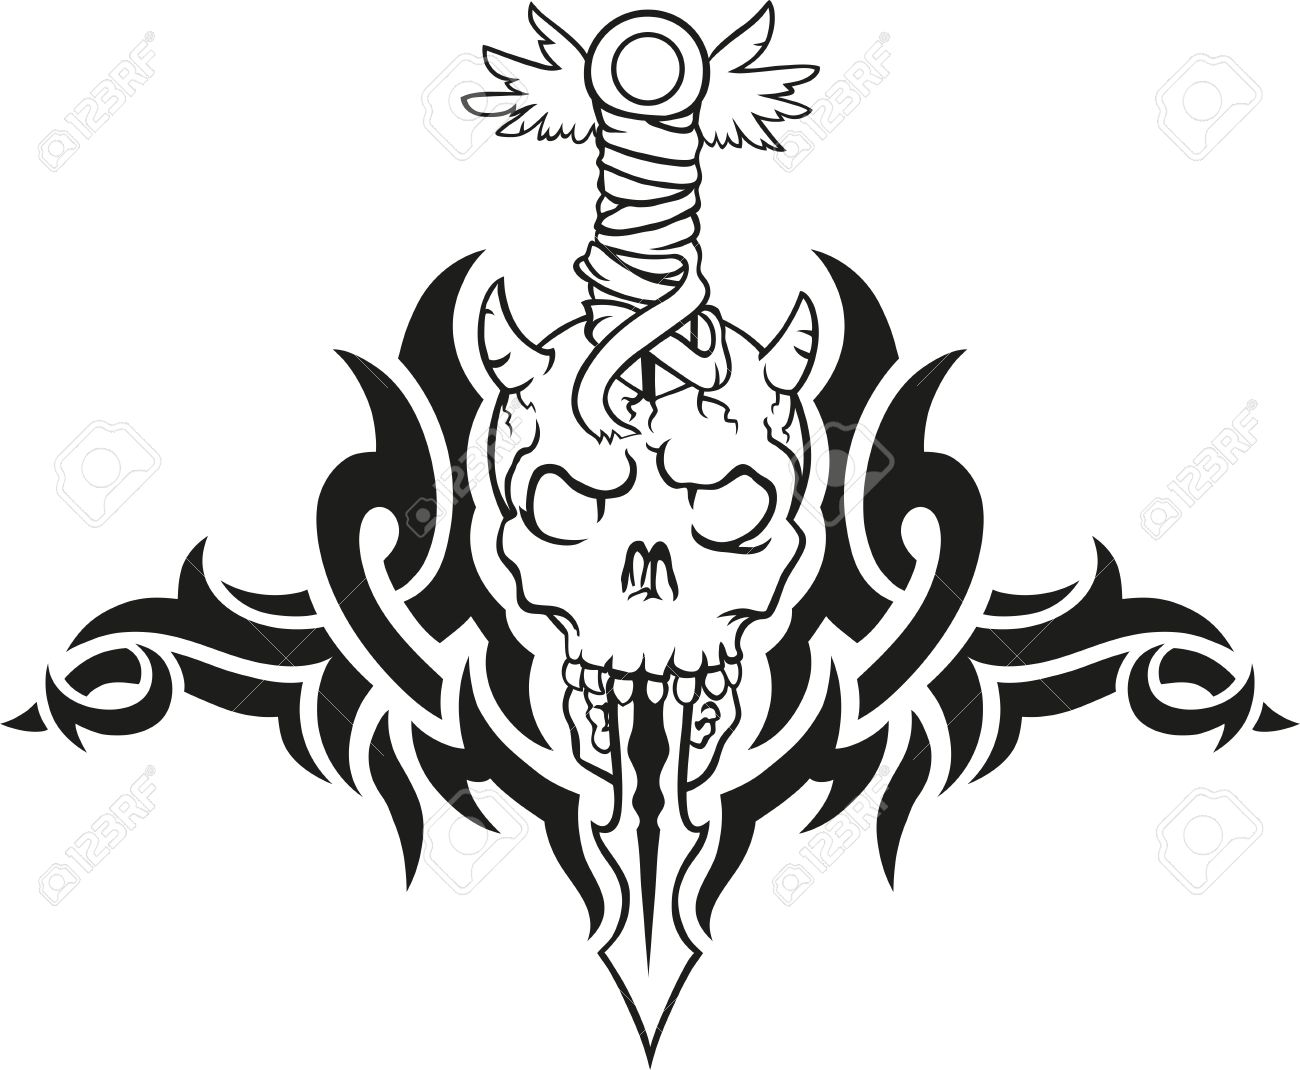 Superb Sword Ripped Skull With Tribal Design Tattoo Sample